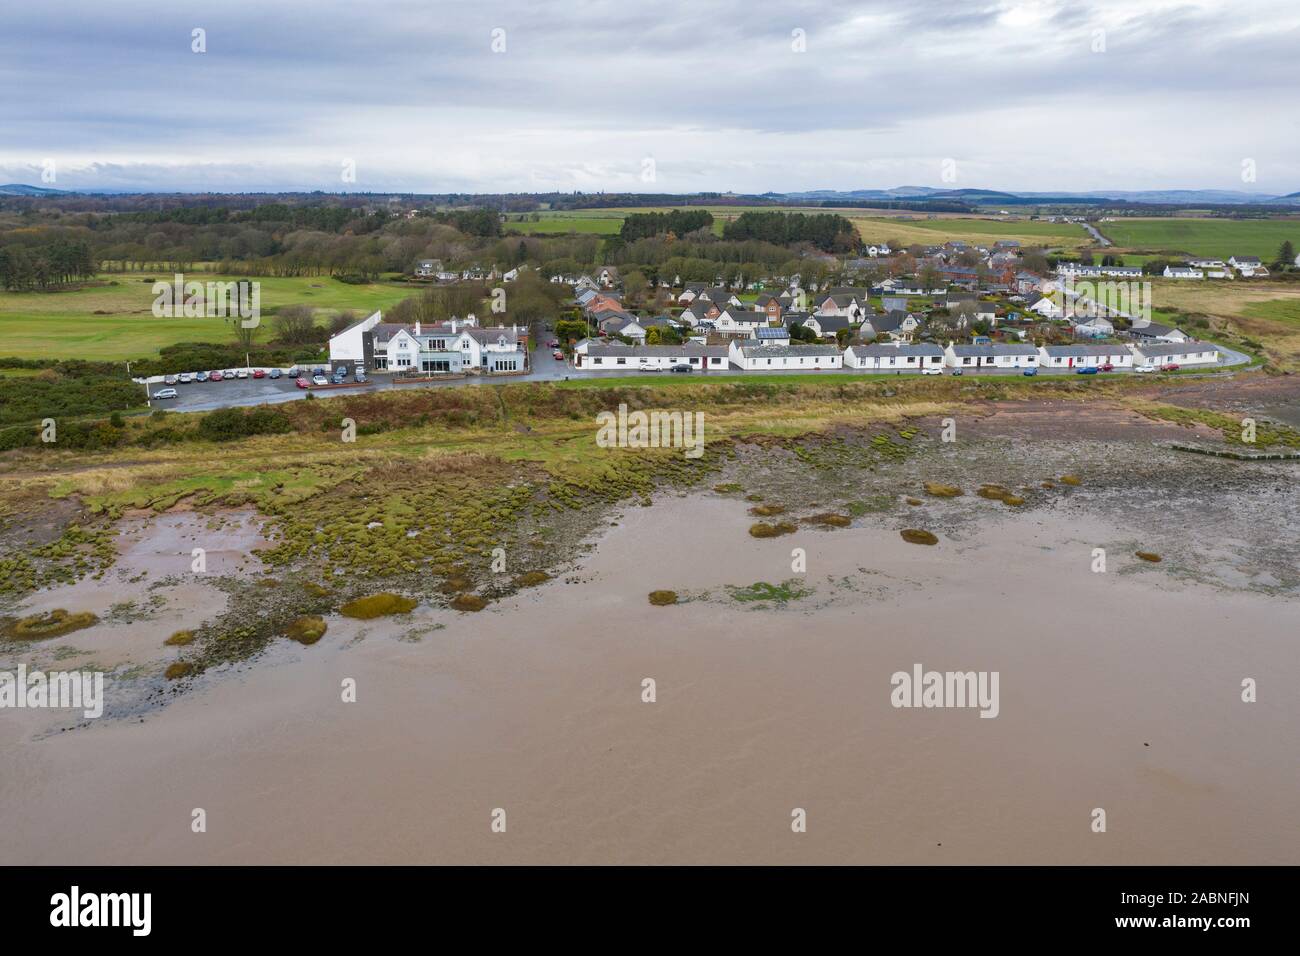 An aerial view of the village of Powfoot, Dumfries and Galloway on the Solway Firth, Scotland. Stock Photo